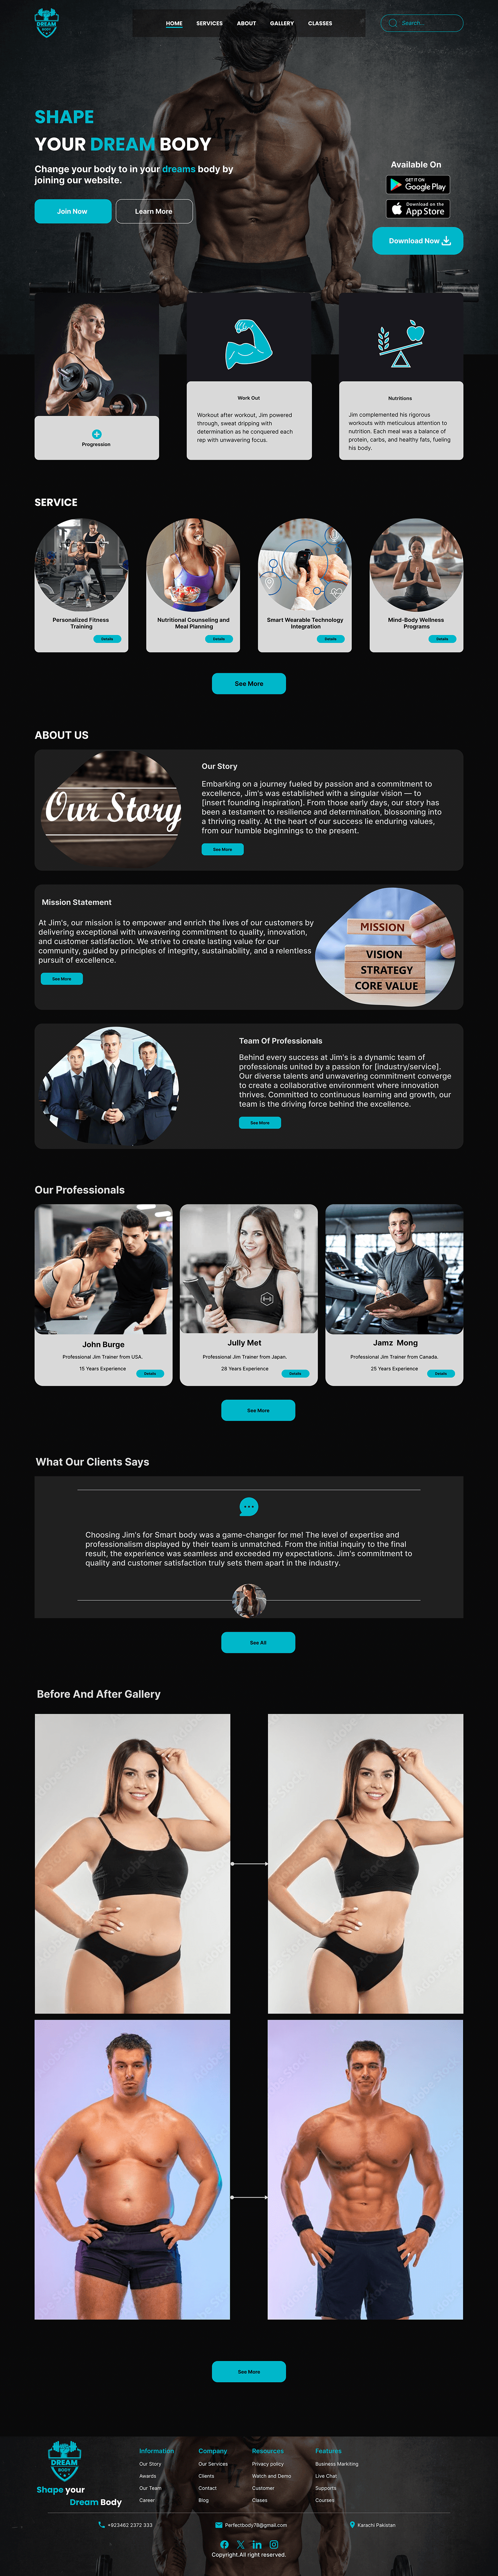 UxUIdesign design gym Gym Landing page fitness Health Fitness Training uxinspiration uxui landing page wotkout